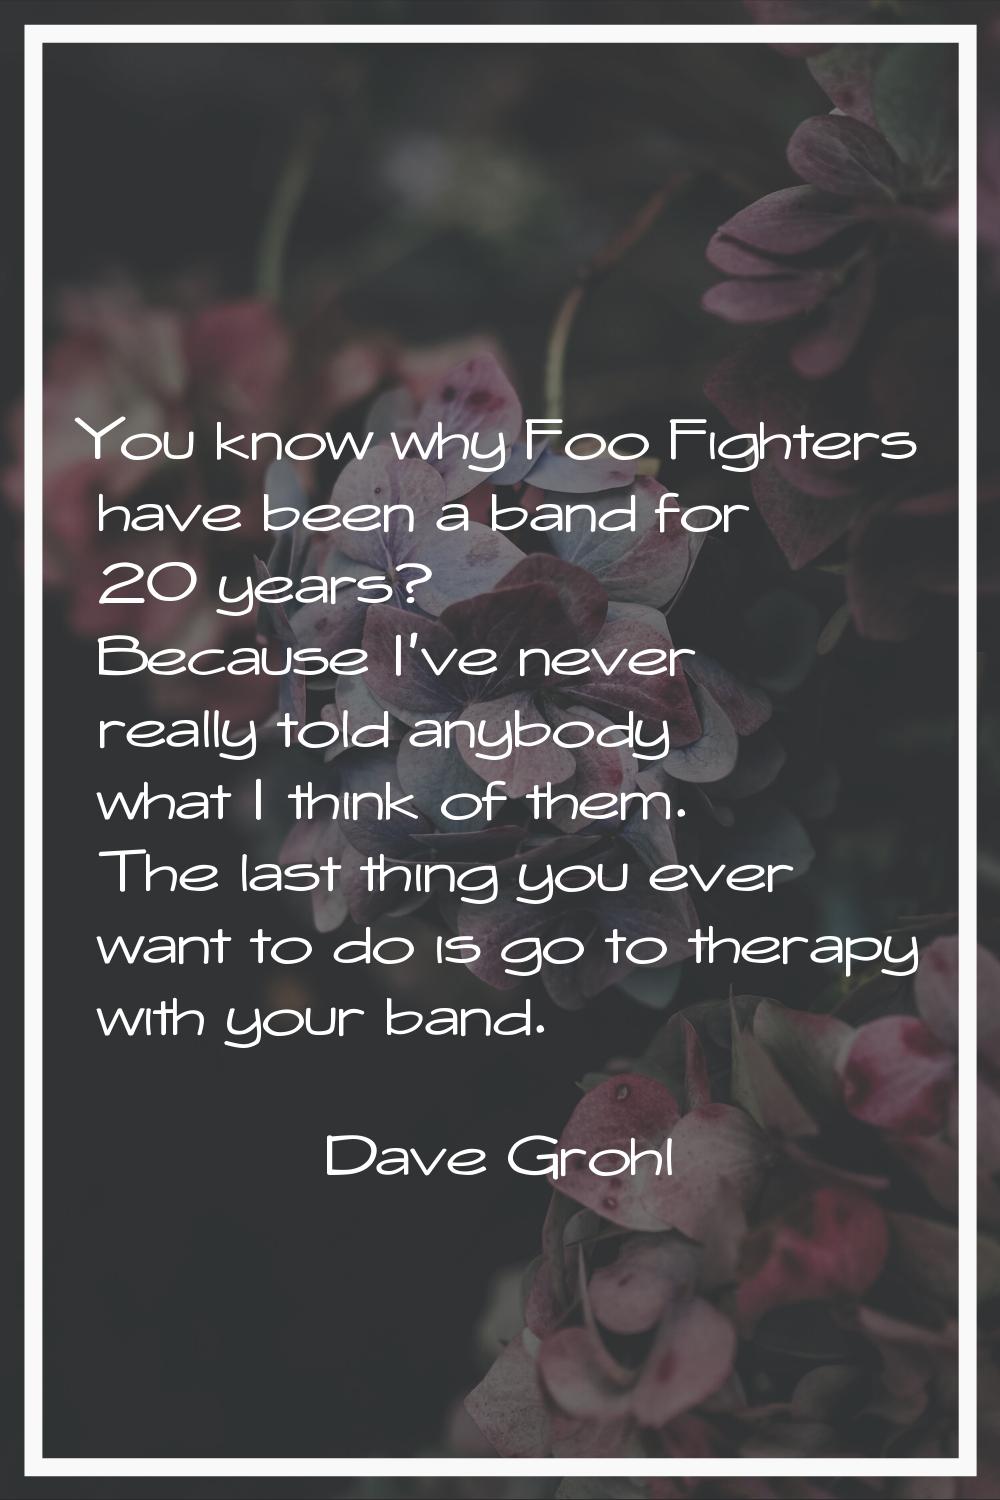 You know why Foo Fighters have been a band for 20 years? Because I've never really told anybody wha